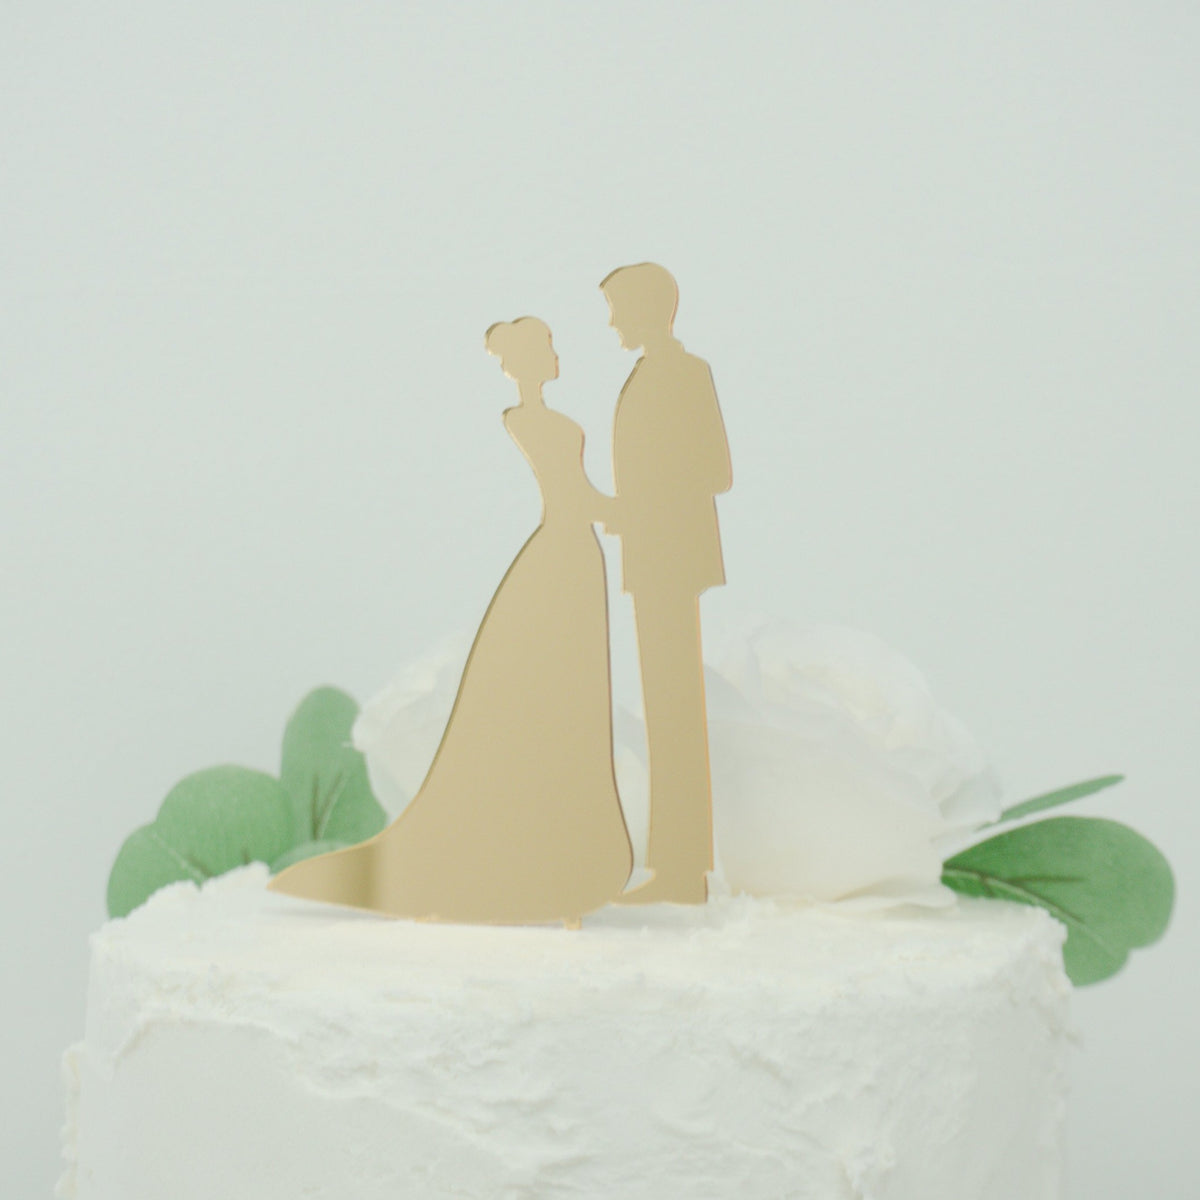 12 Ideas for Hilarious Funny Wedding Cake Toppers– TeckwrapCraft